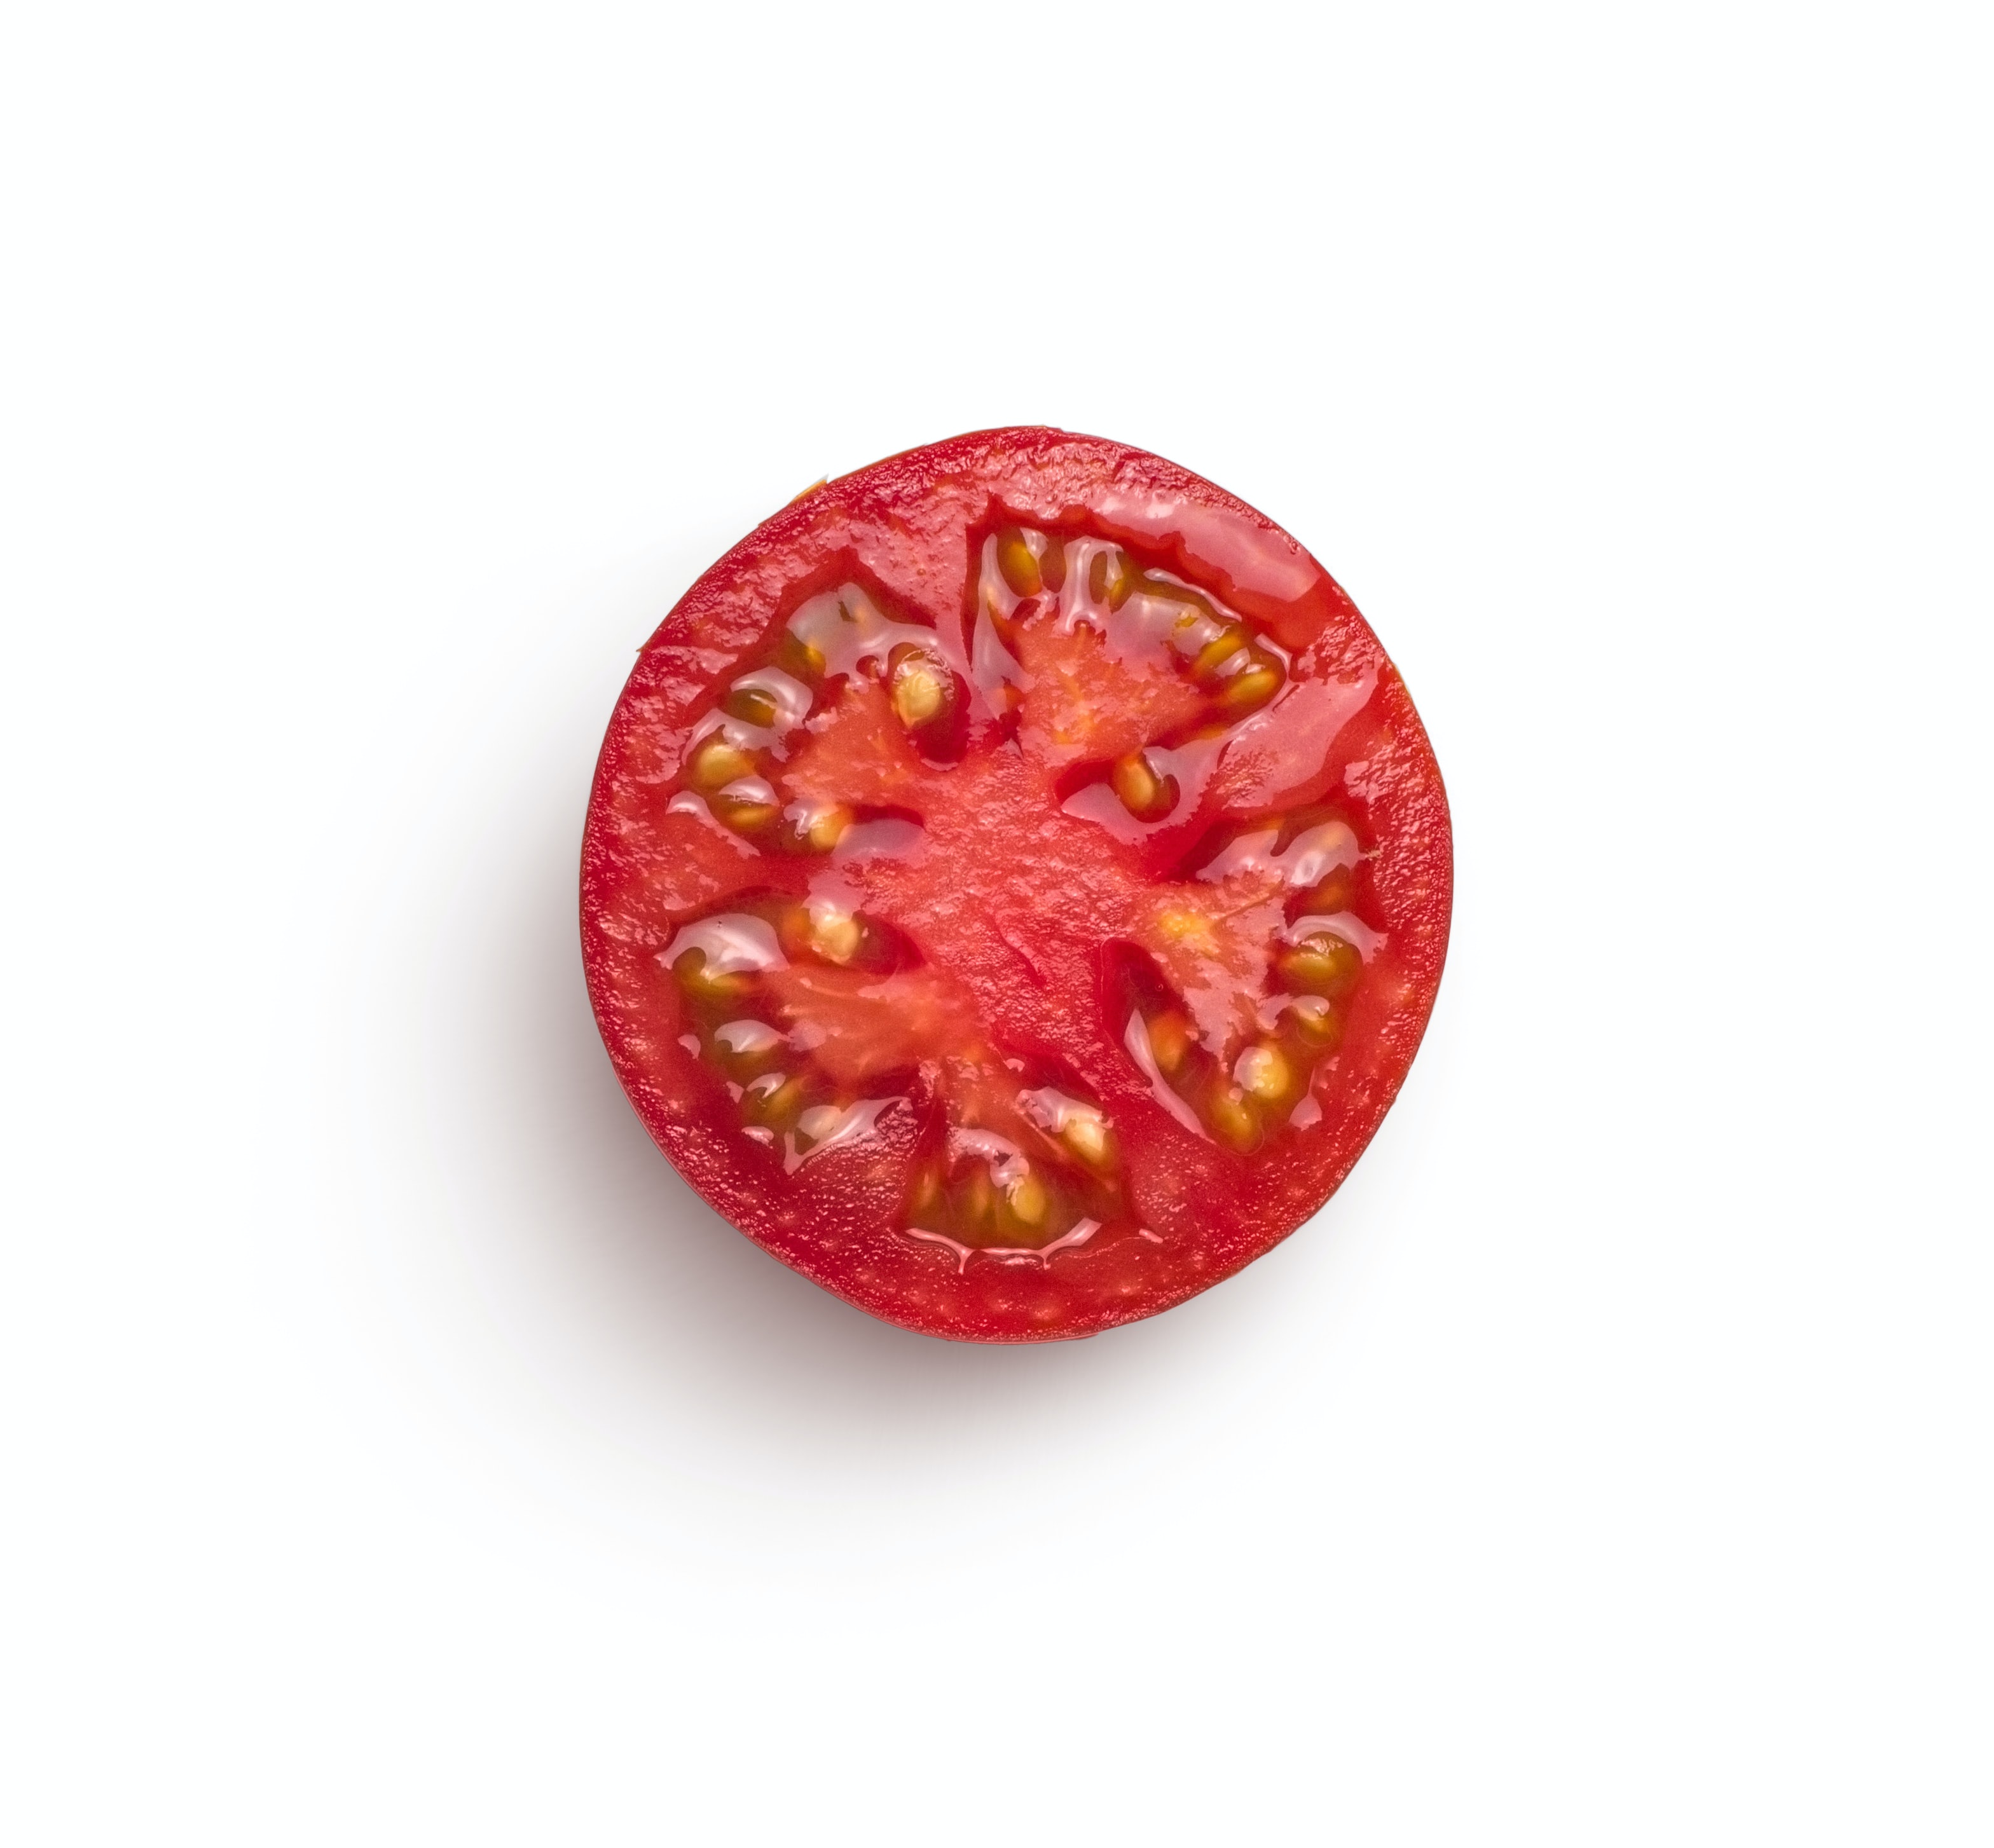 A very ripe tomato, cut in half, appears on a white background, seeds facing the camera.